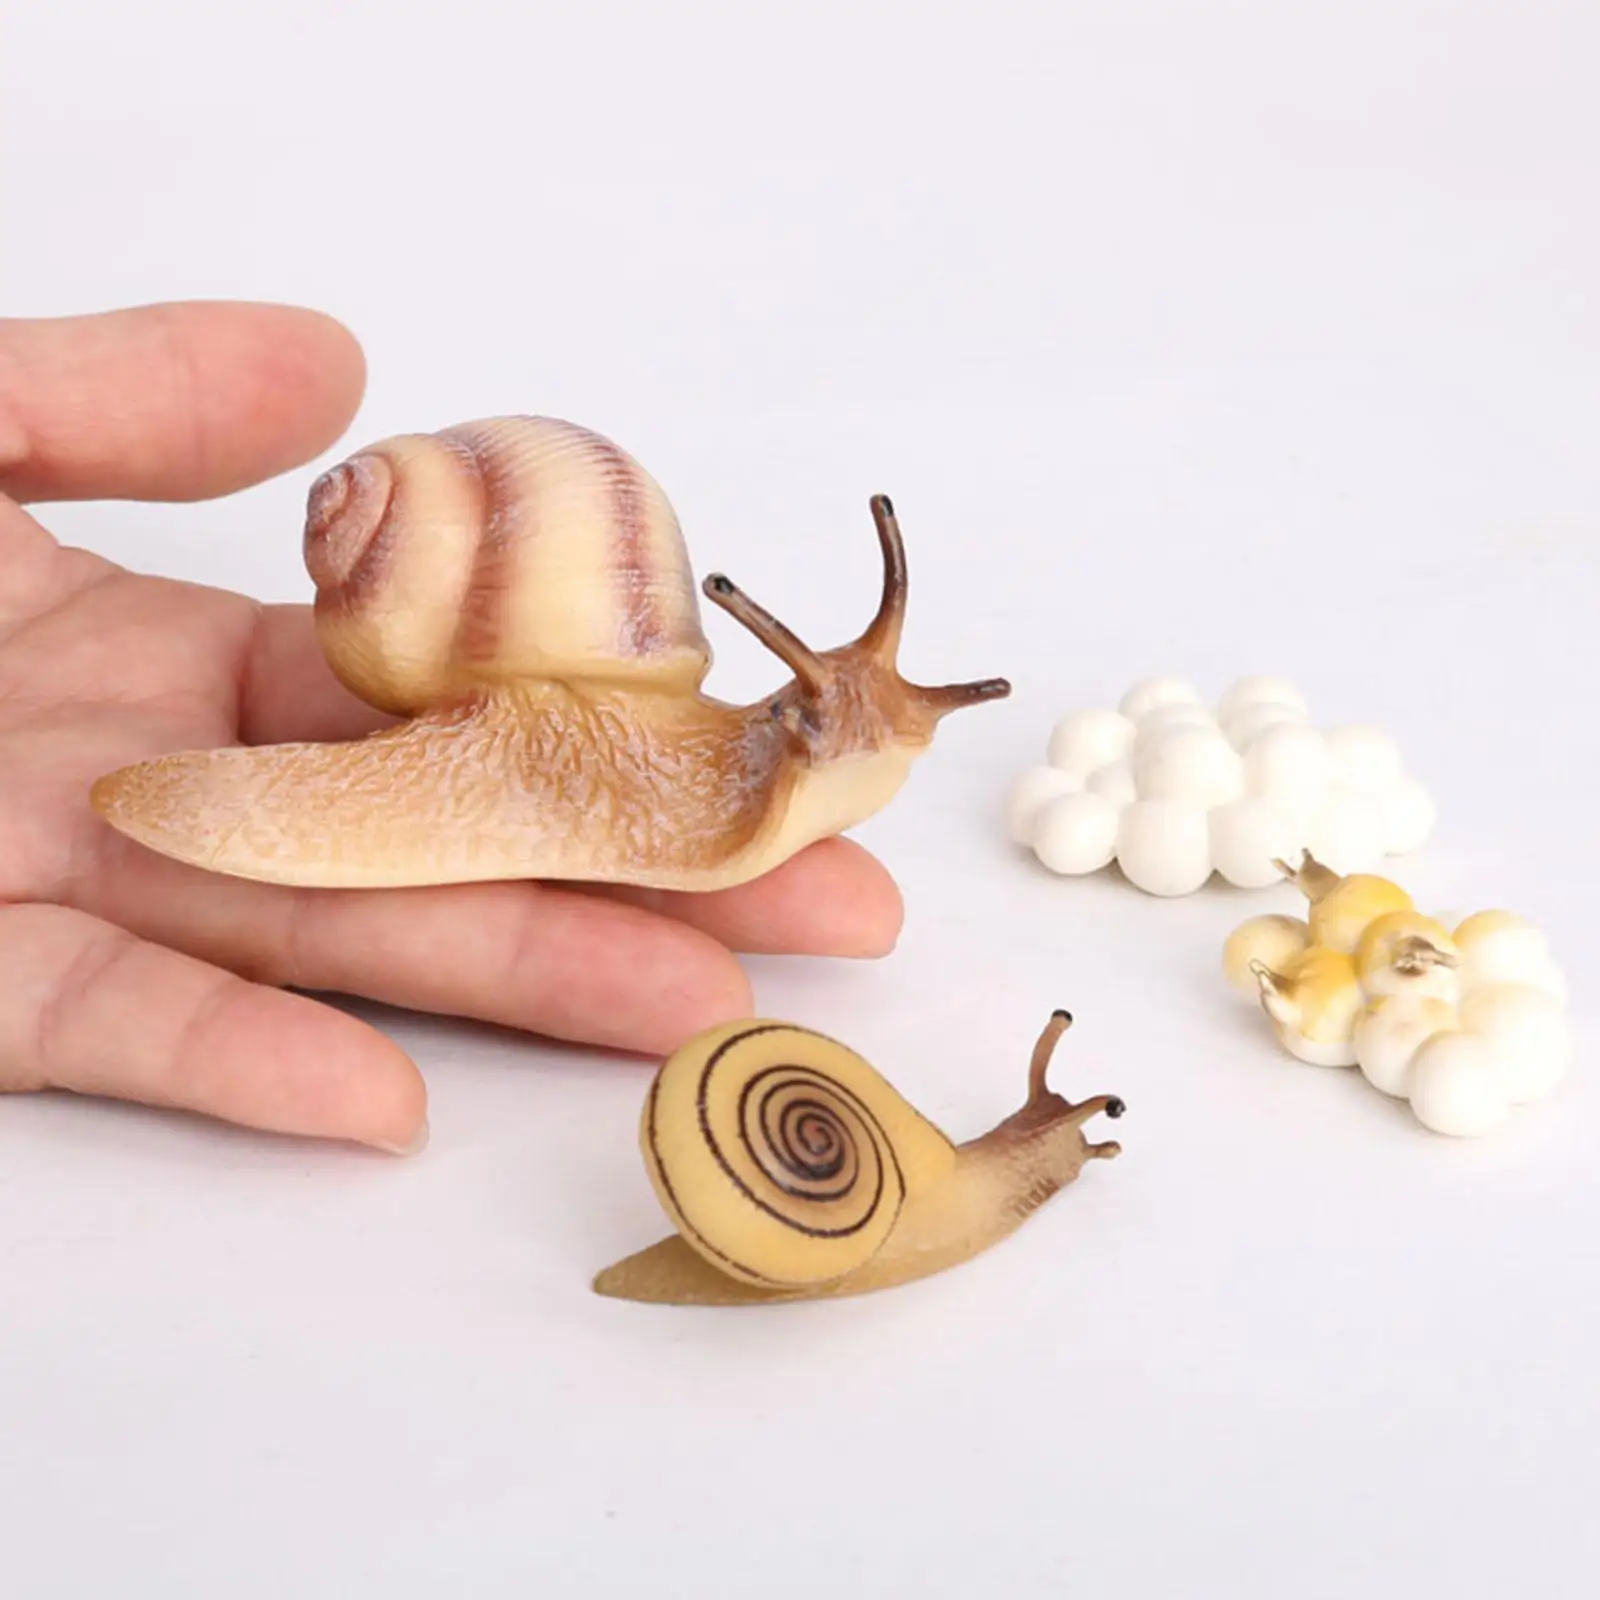 4 Stage Snail Growth Cycle Model  Cycle  Toys Kids Cognitve Toy